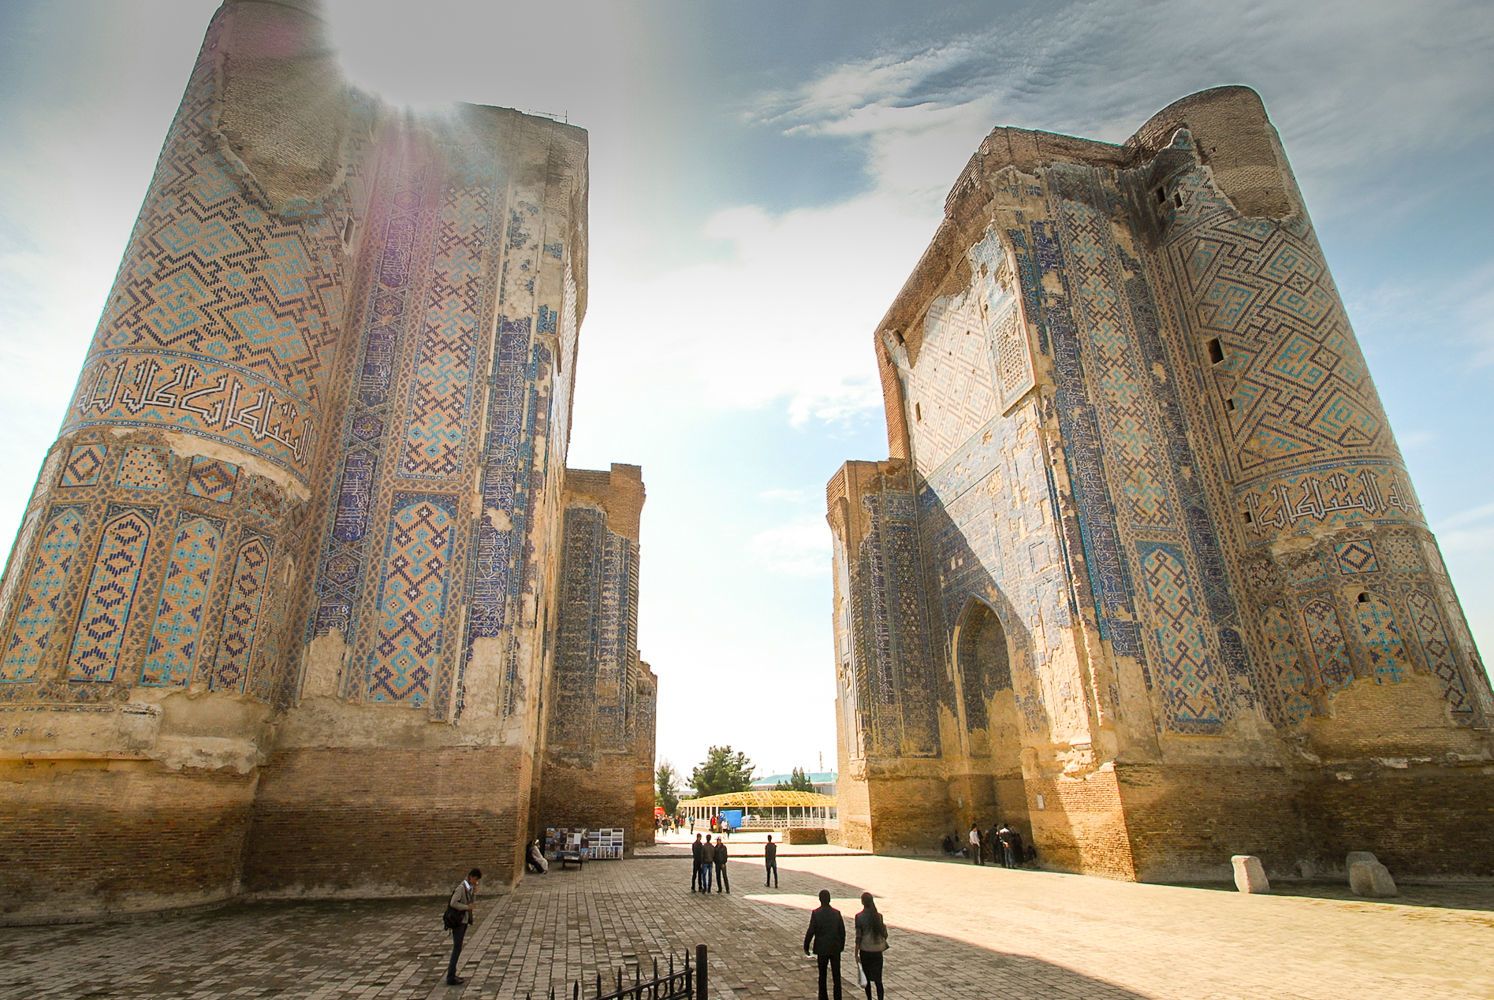 Shahrisabz is one of the top travel places in Uzbekistan